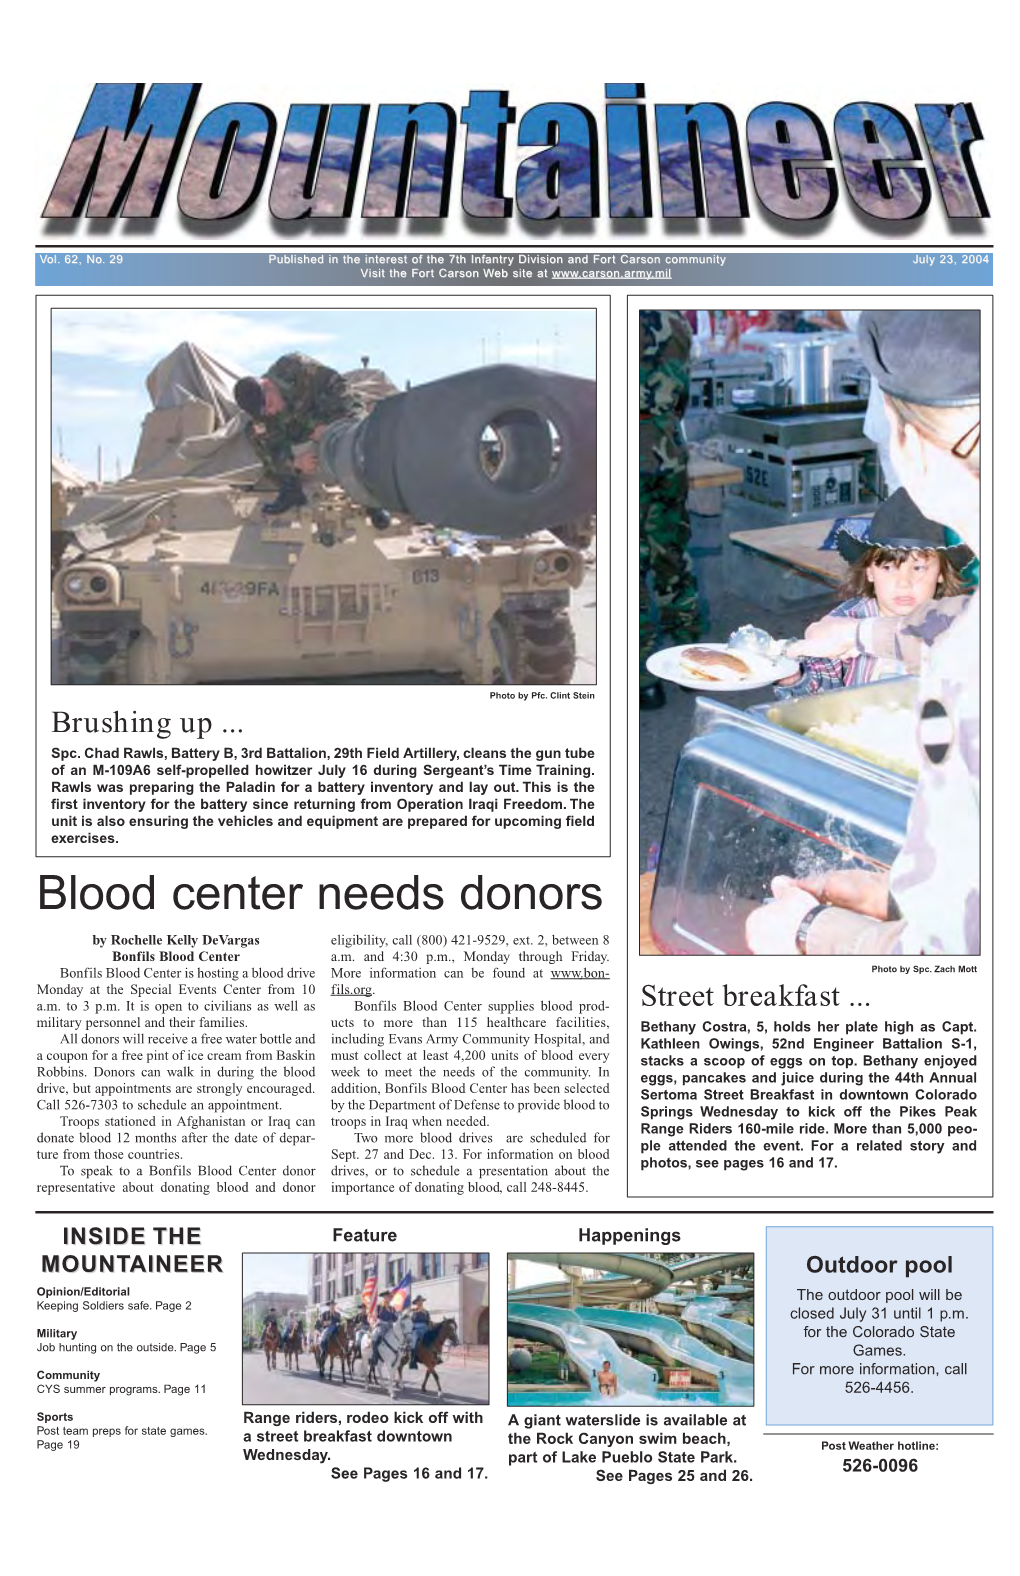 July 23, 2004 Visit the Fort Carson Web Site At